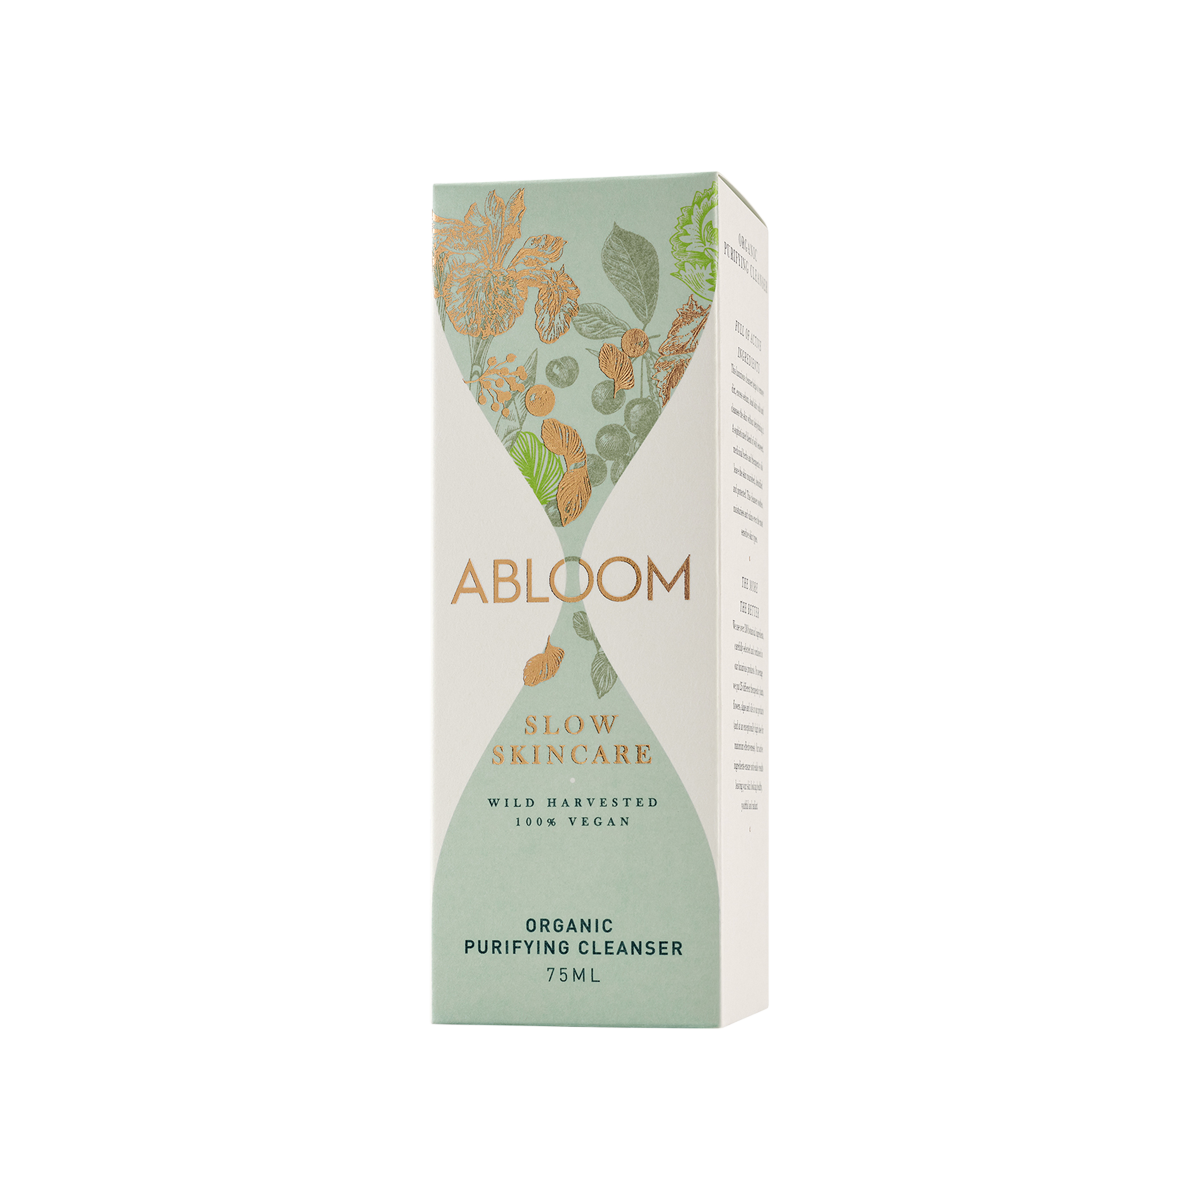 ABLOOM - Organic Purifying Cleanser